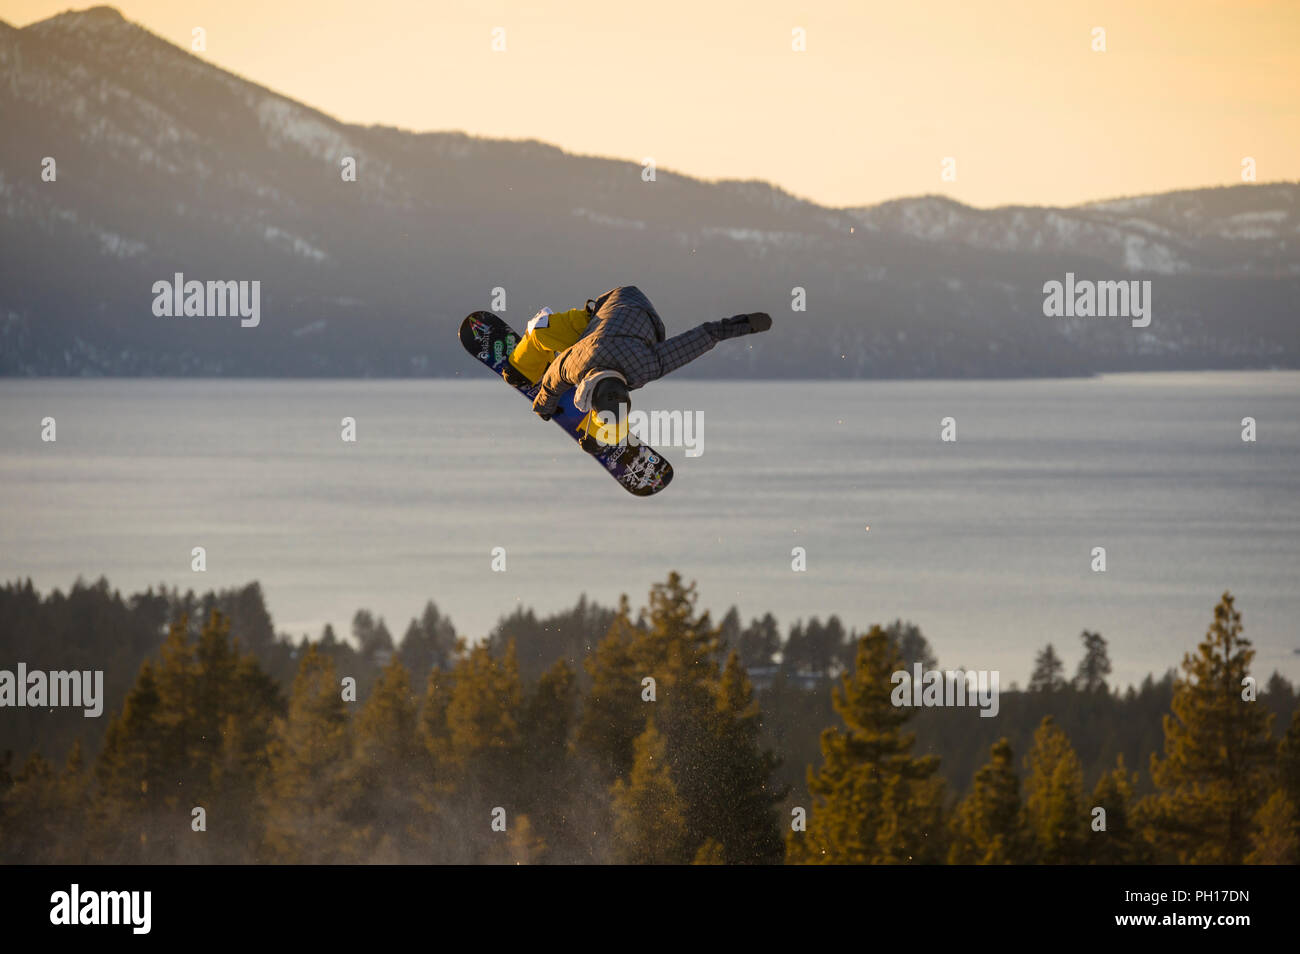 Big Air snowboarding competition at Heavenly Valley Ski Resort in South Lake Tahoe, California, North America Stock Photo